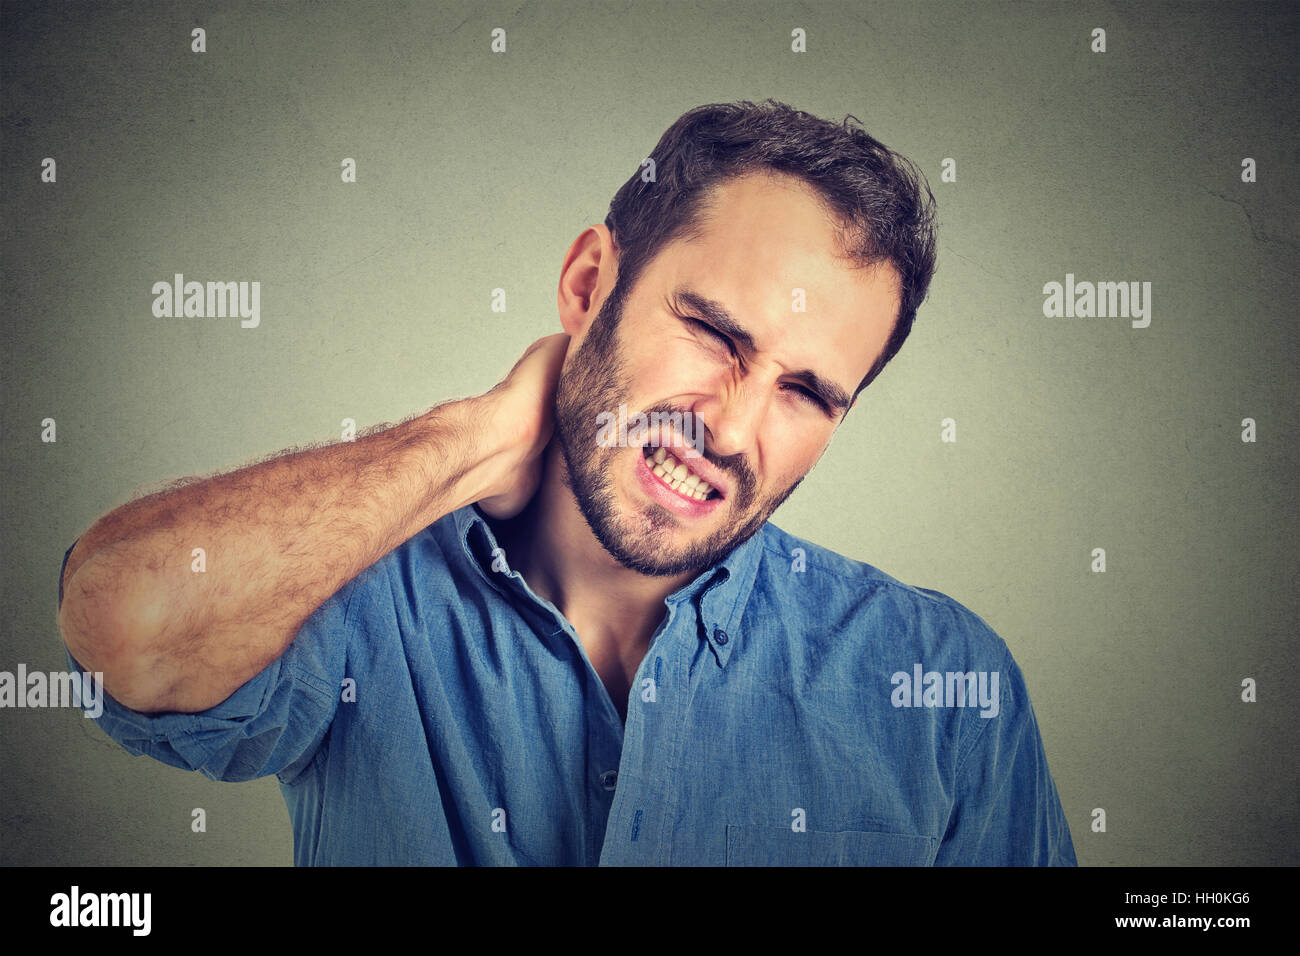 stressed, young man with bad neck pain, after long hours of work studying isolated on gray background. Negative human emotion Stock Photo